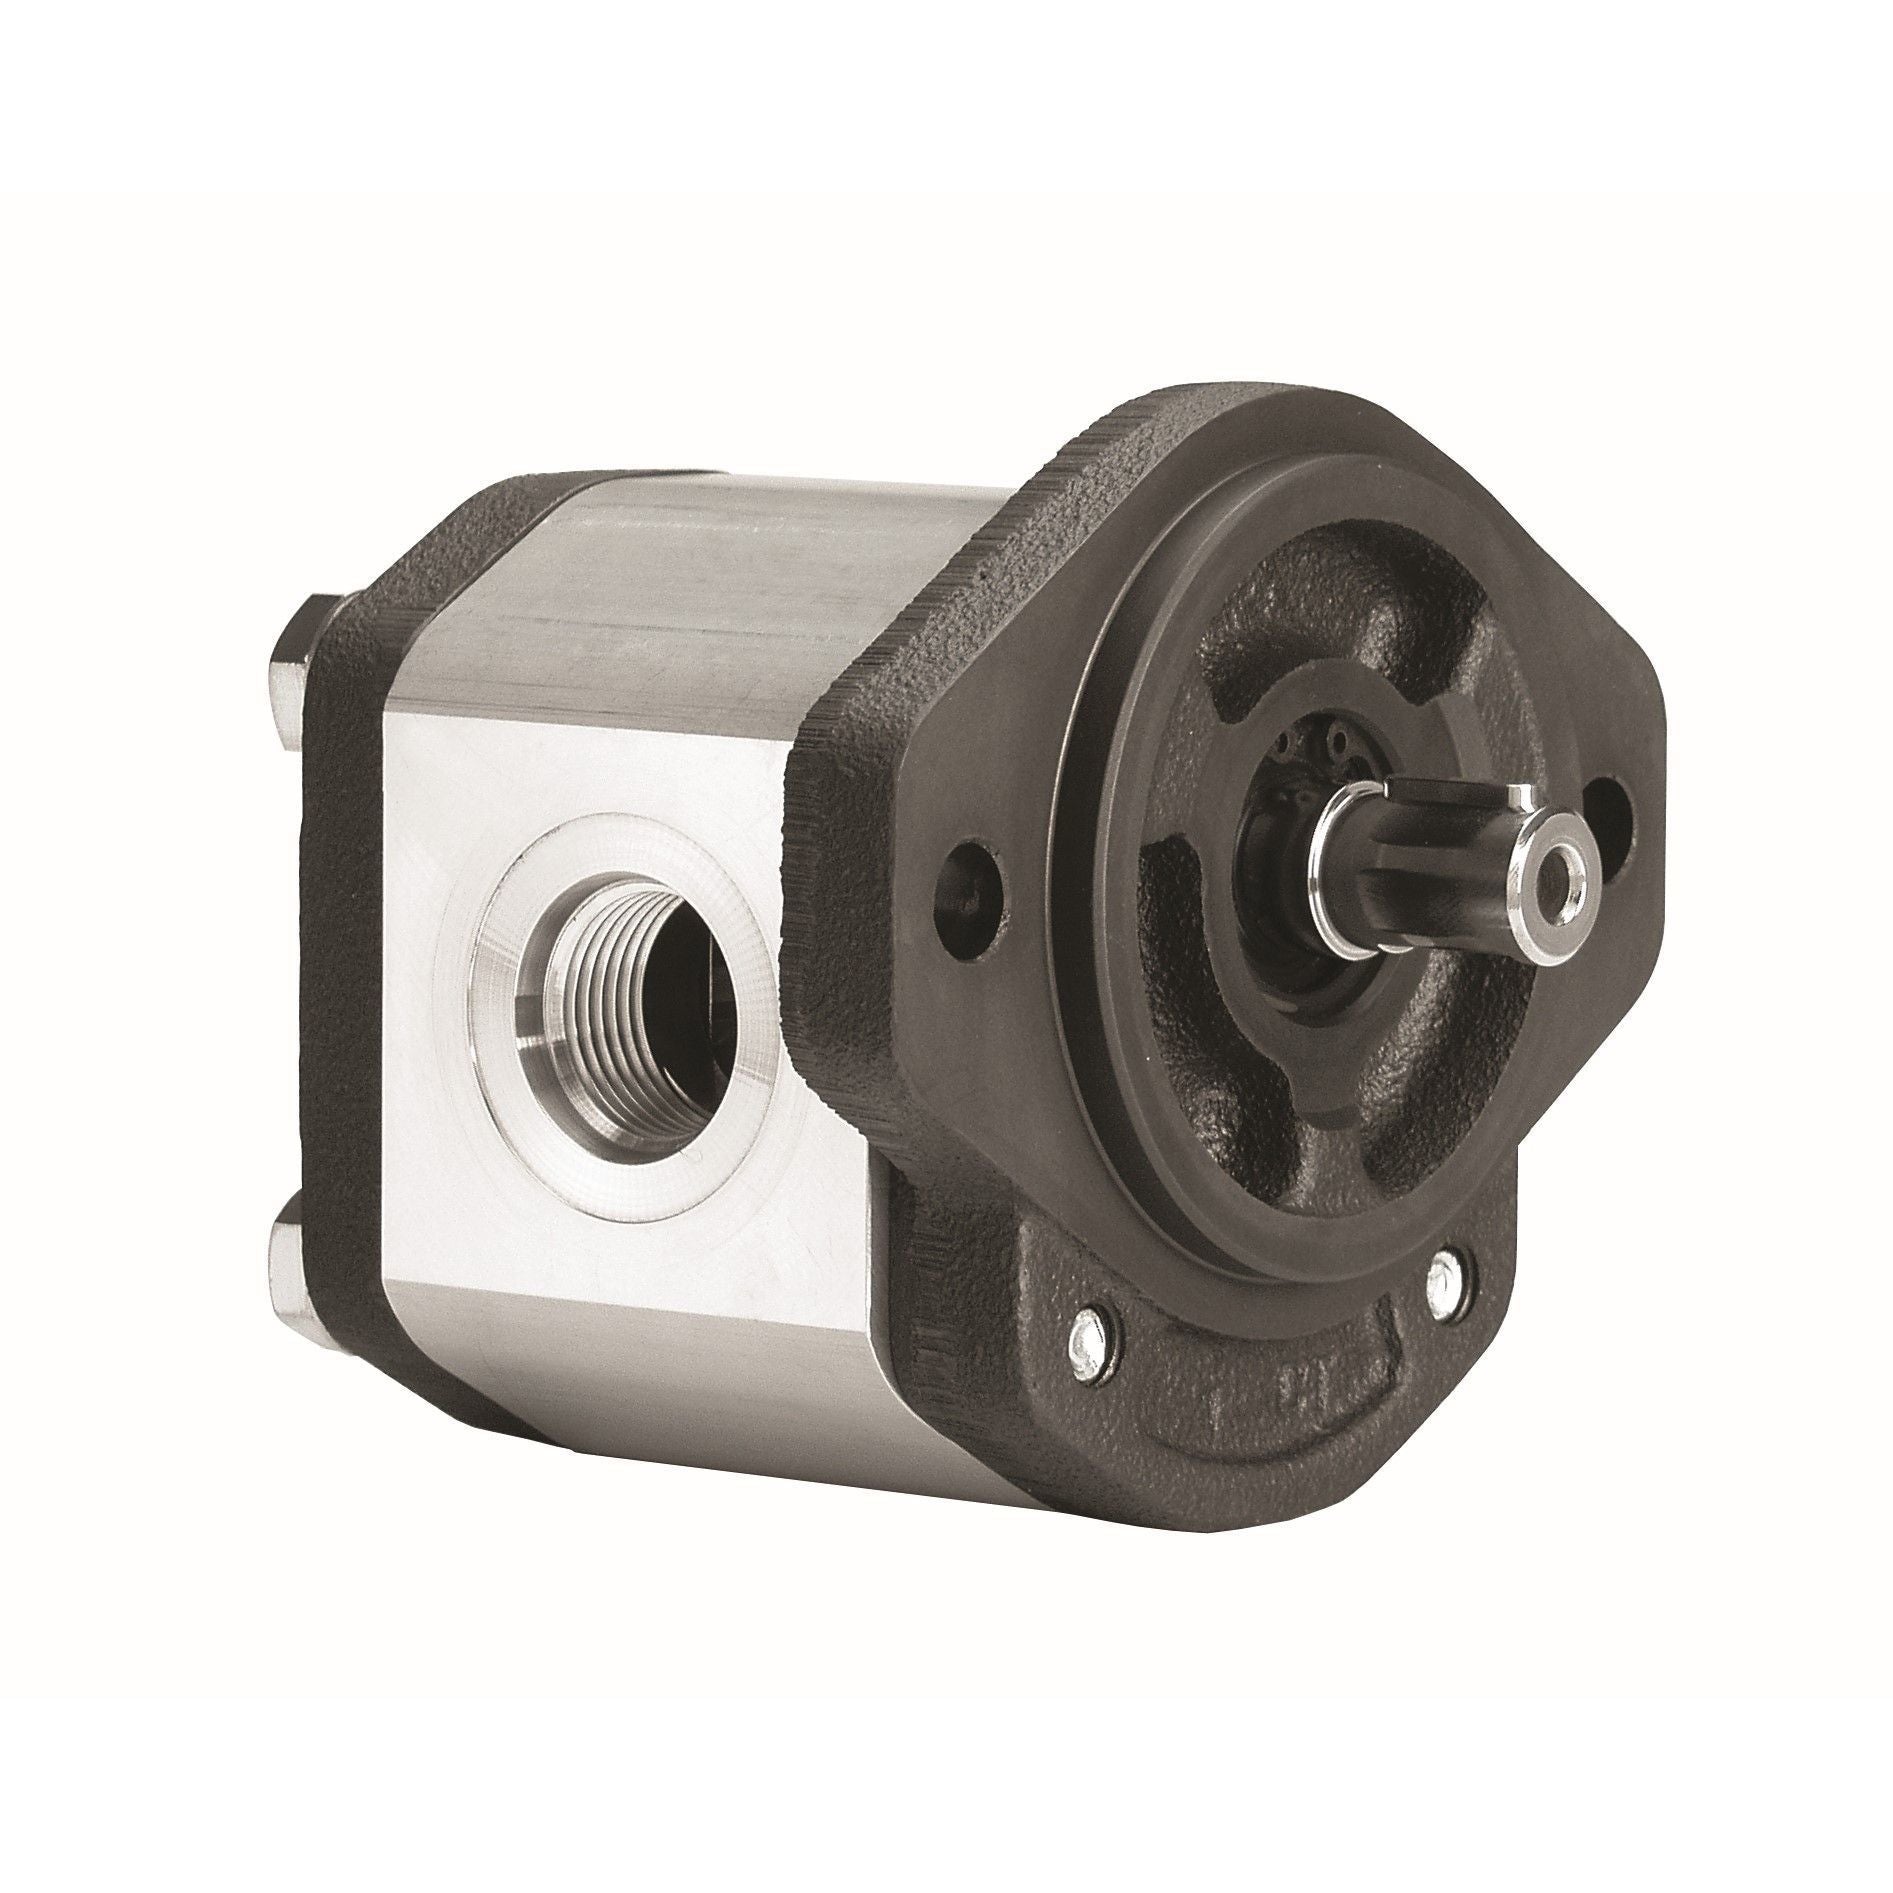 GHP2A-D-9 : Marzocchi Gear Pump, CW, 6.4cc (0.3904in3), 3.04 GPM, 4060psi, 4000 RPM, #12 SAE (3/4") In, #10 SAE (5/8") Out, Keyed Shaft 5/8" Bore x 5/32" Key, SAE A 2-Bolt Mount